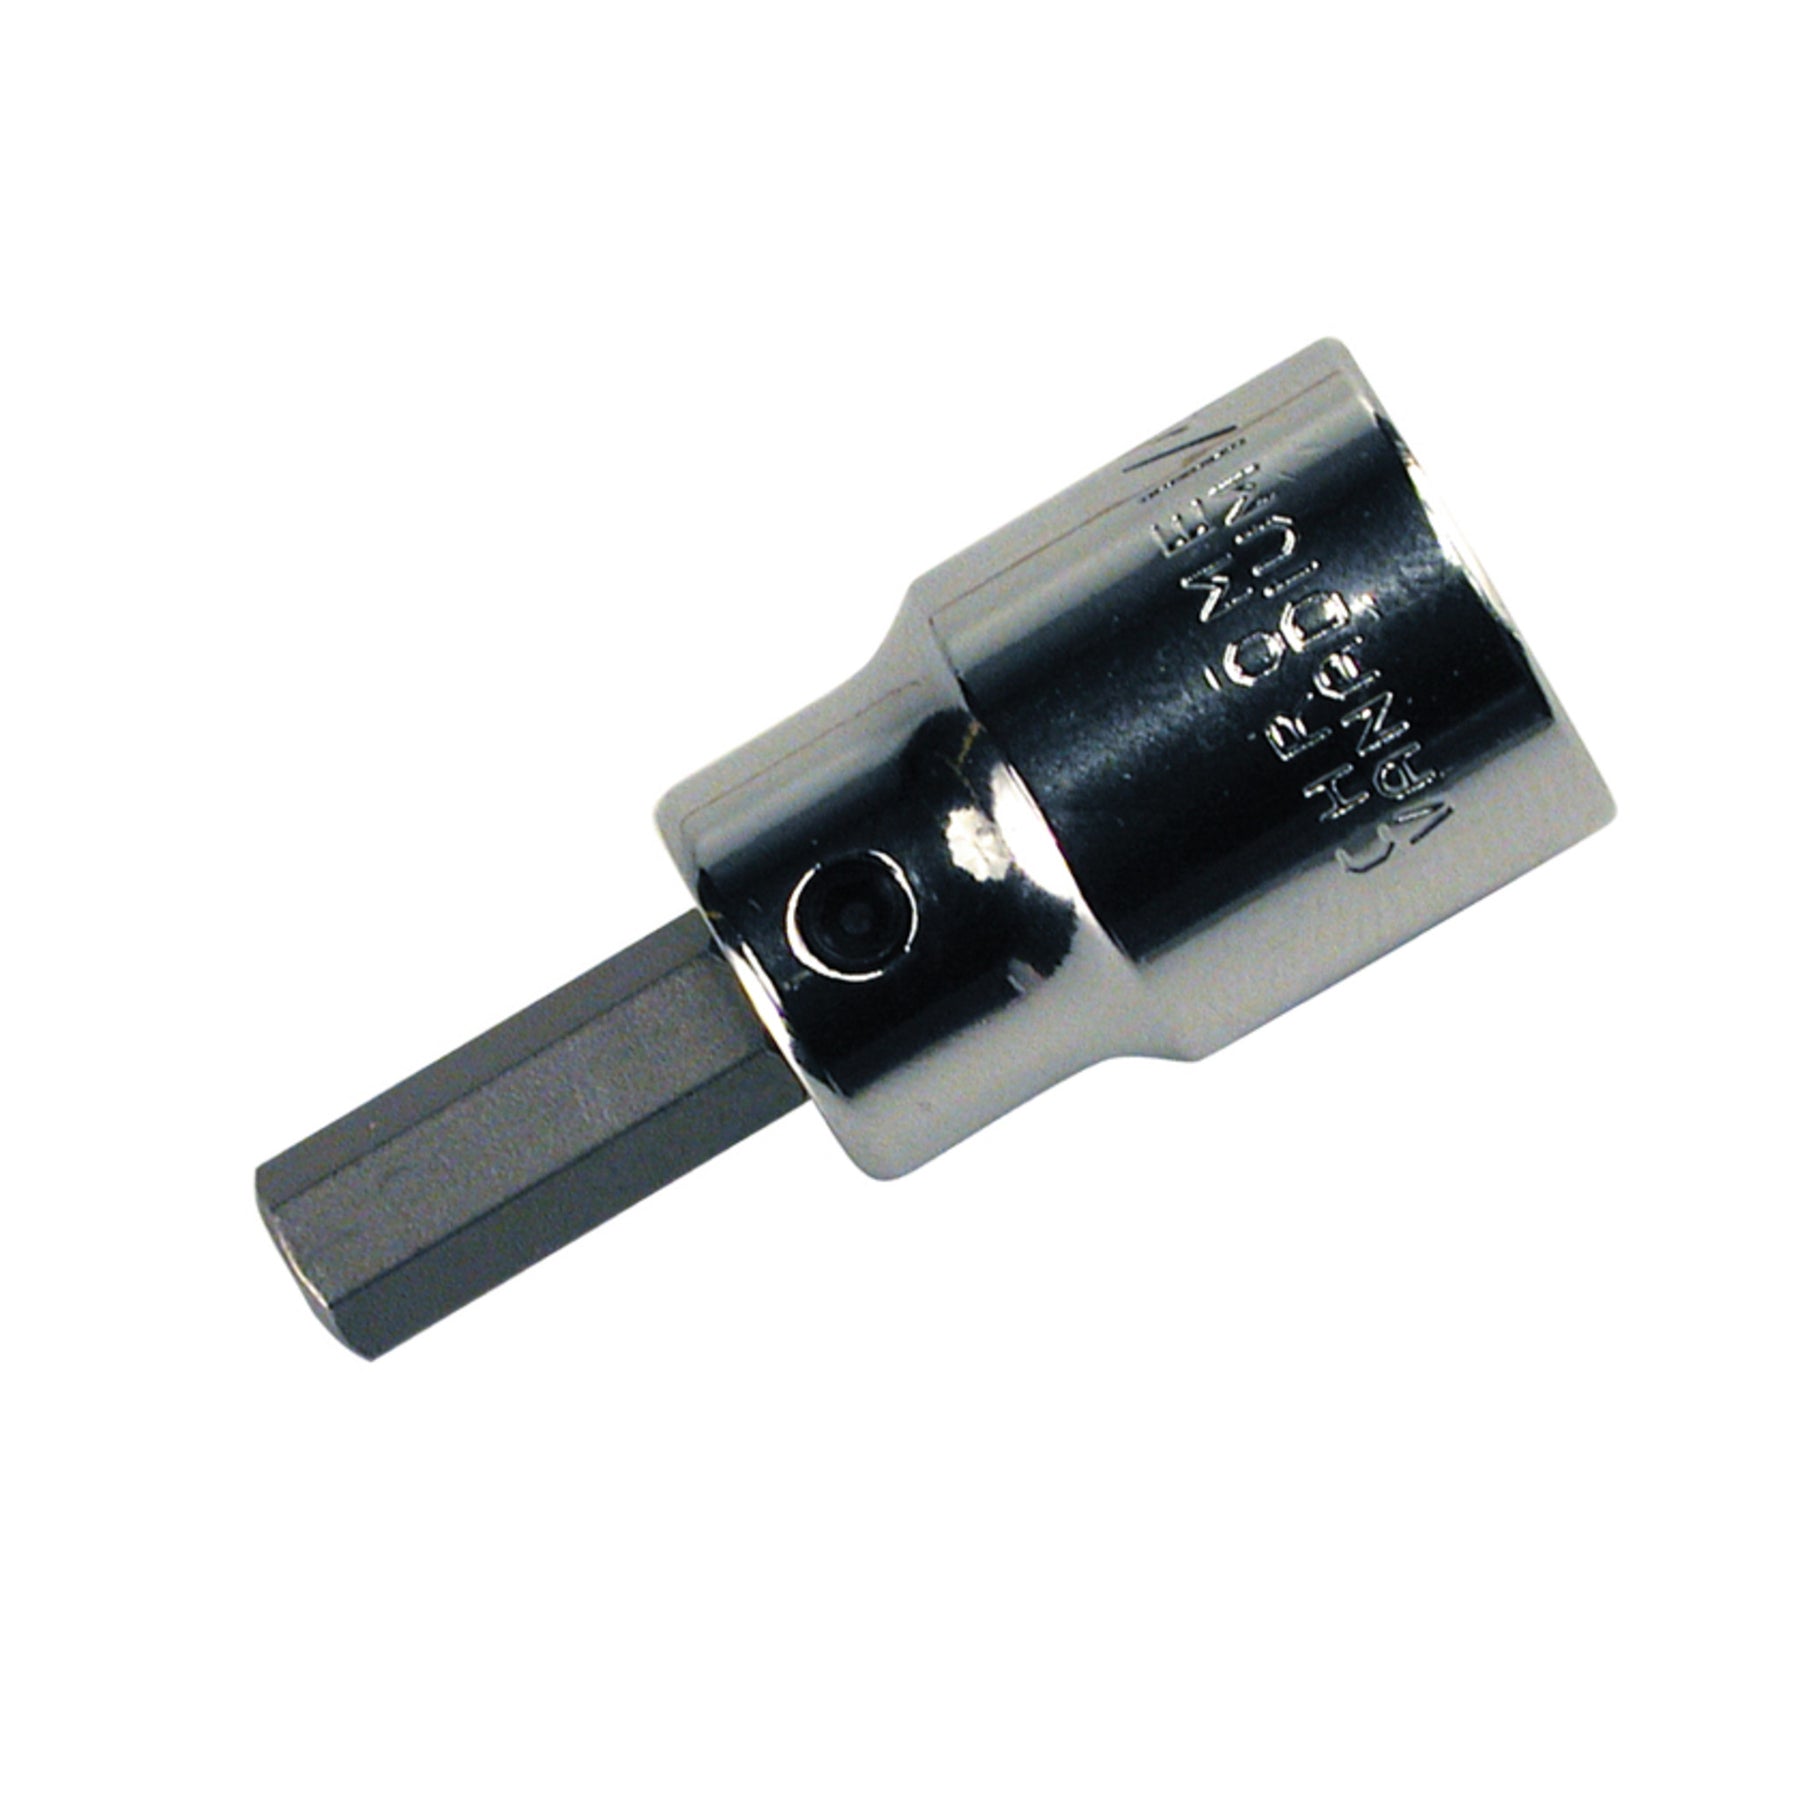 Security Hex BitSocket 3/8" Drive 1/8"